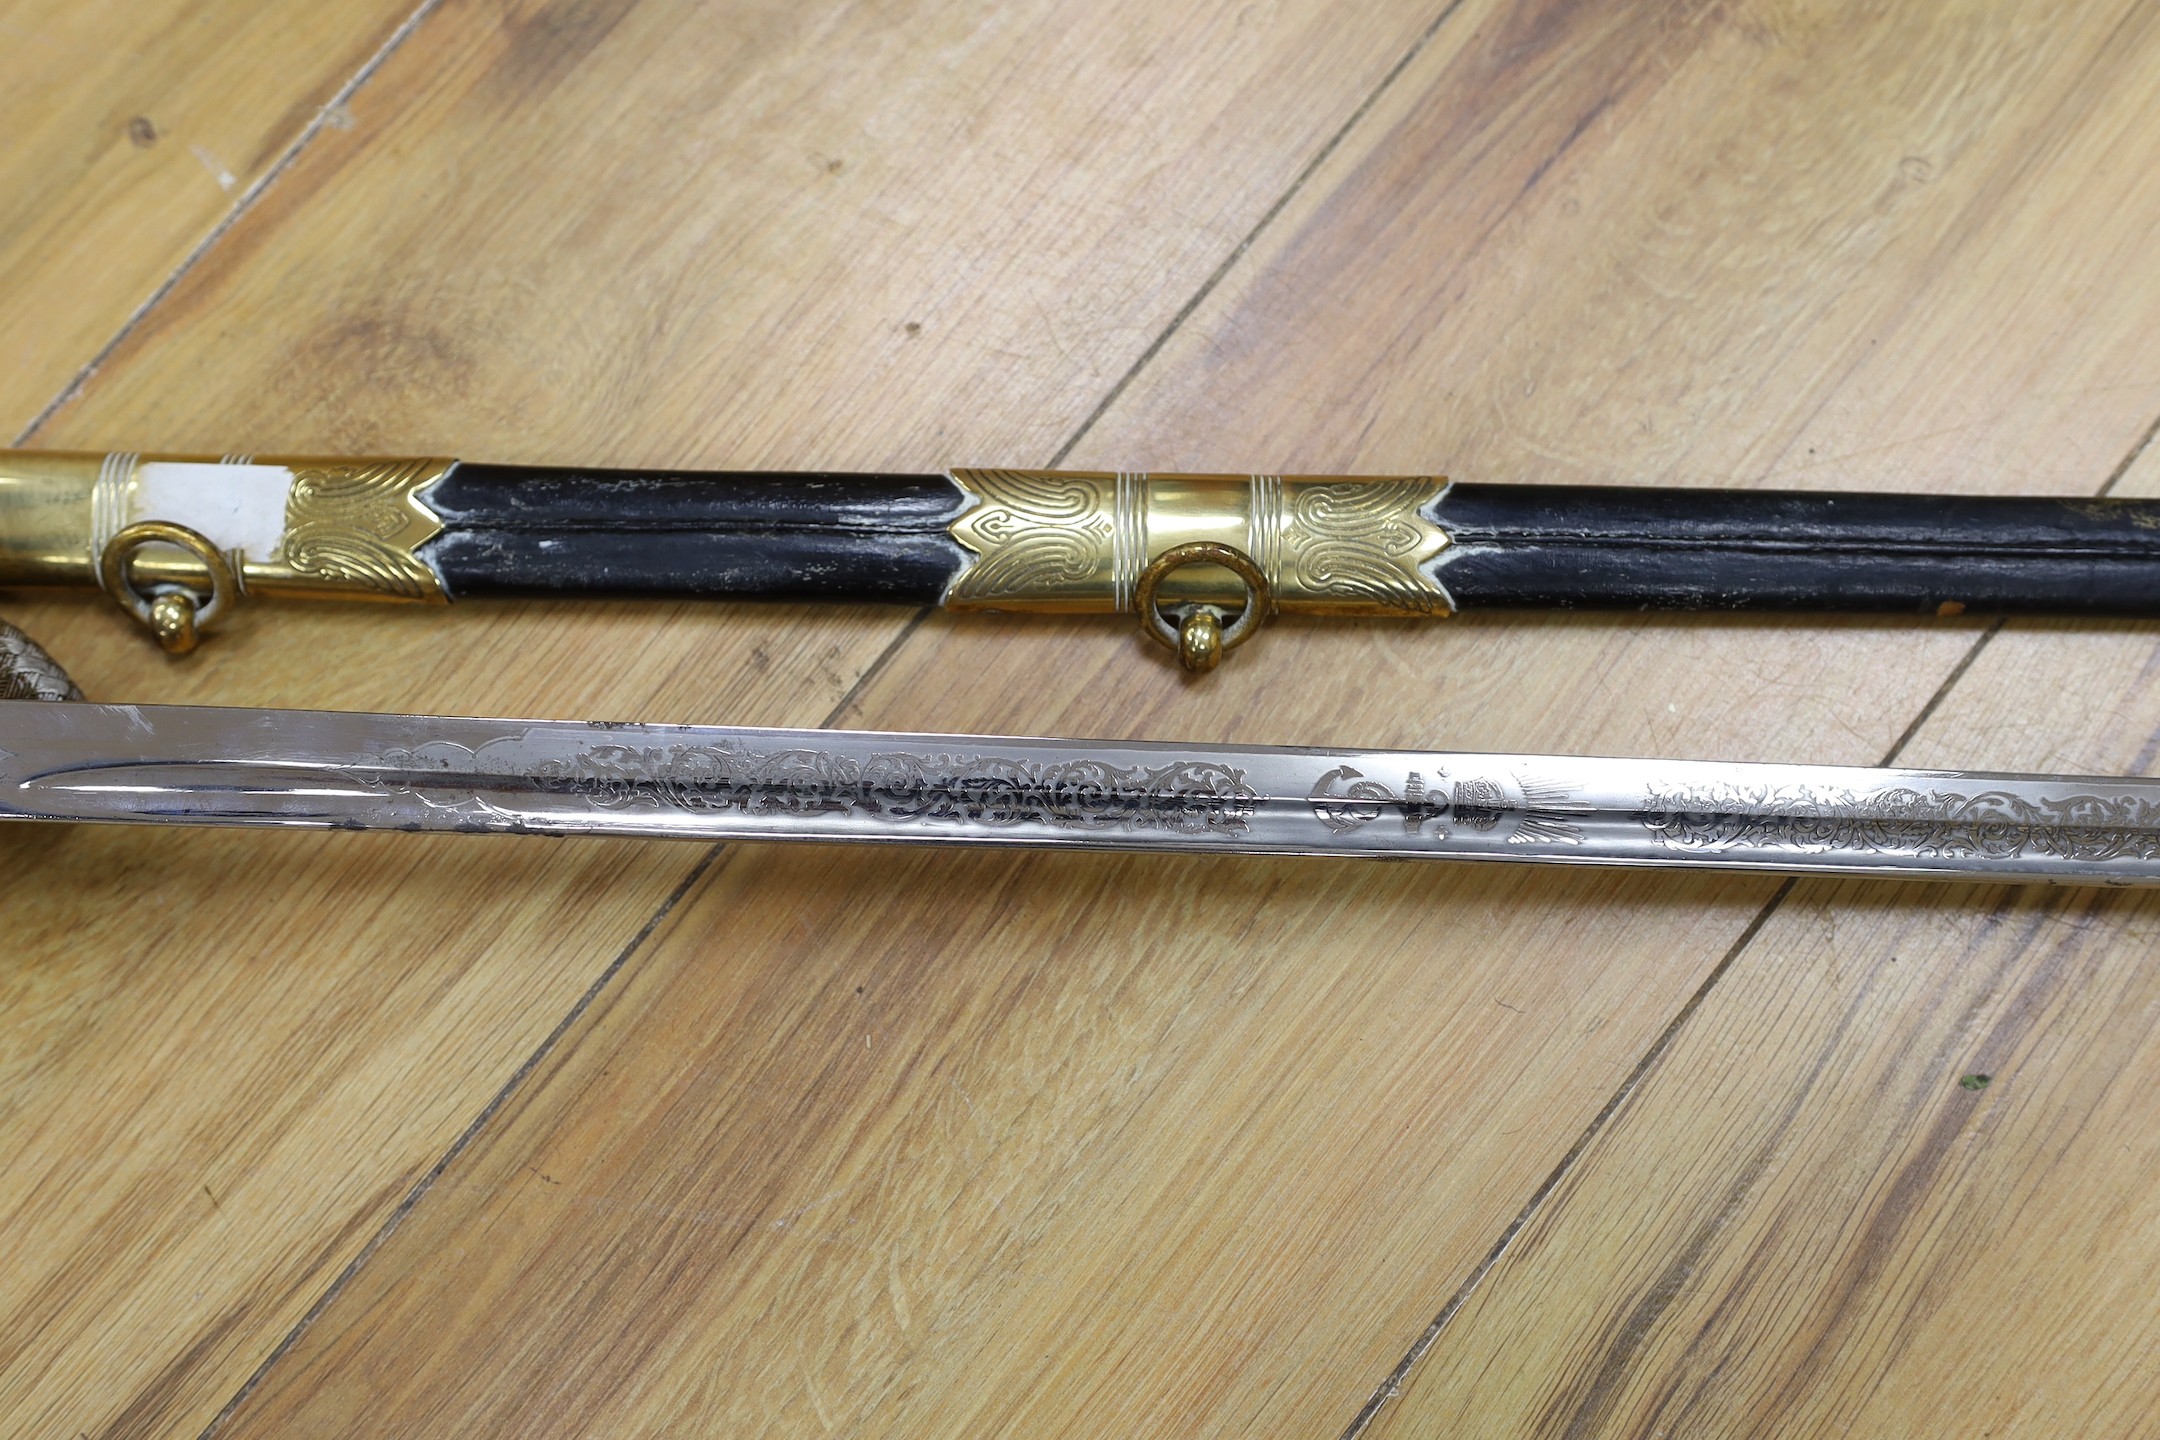 A QEII Naval officer's dress sword and scabbard - Image 8 of 9